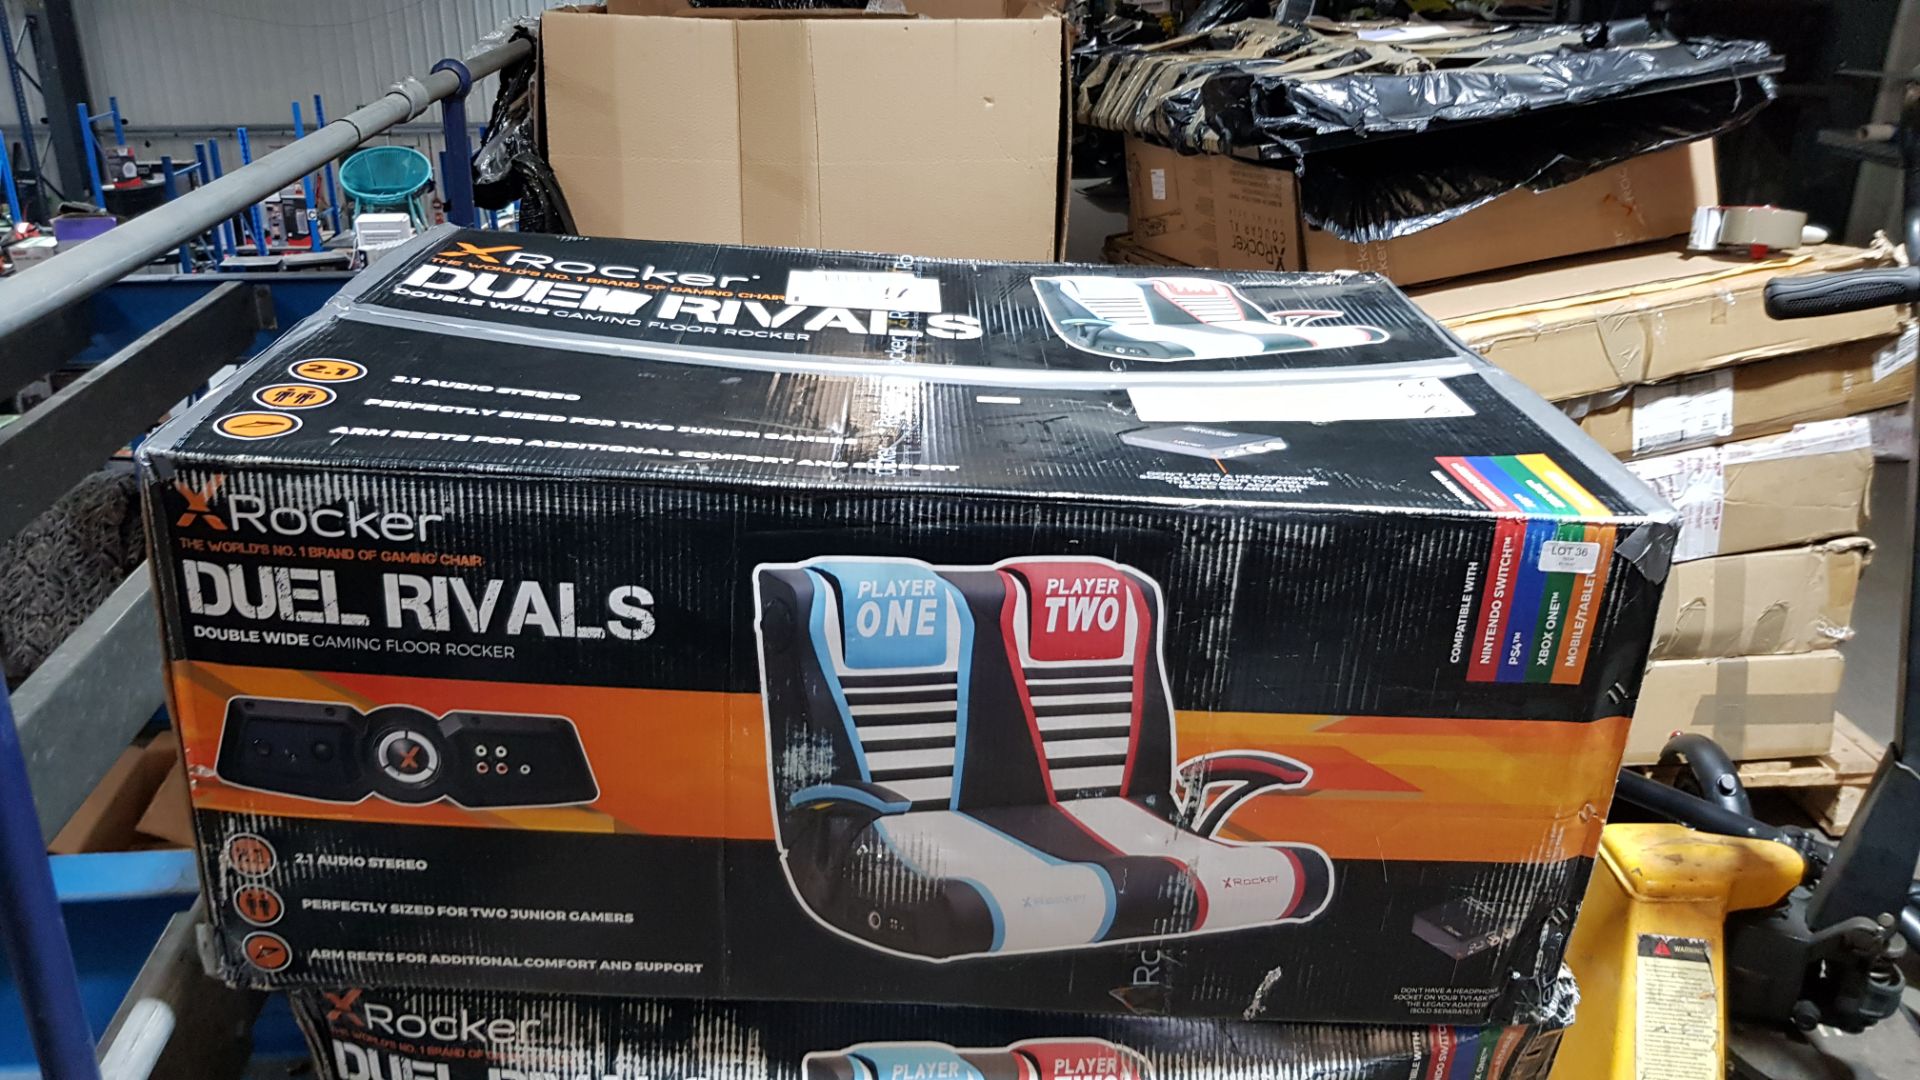 (P5) 1x X-Rocker Duel Rivals Double Wide Gaming Floor Rocker RRP £199. Contents Appear As New, In O - Image 2 of 6